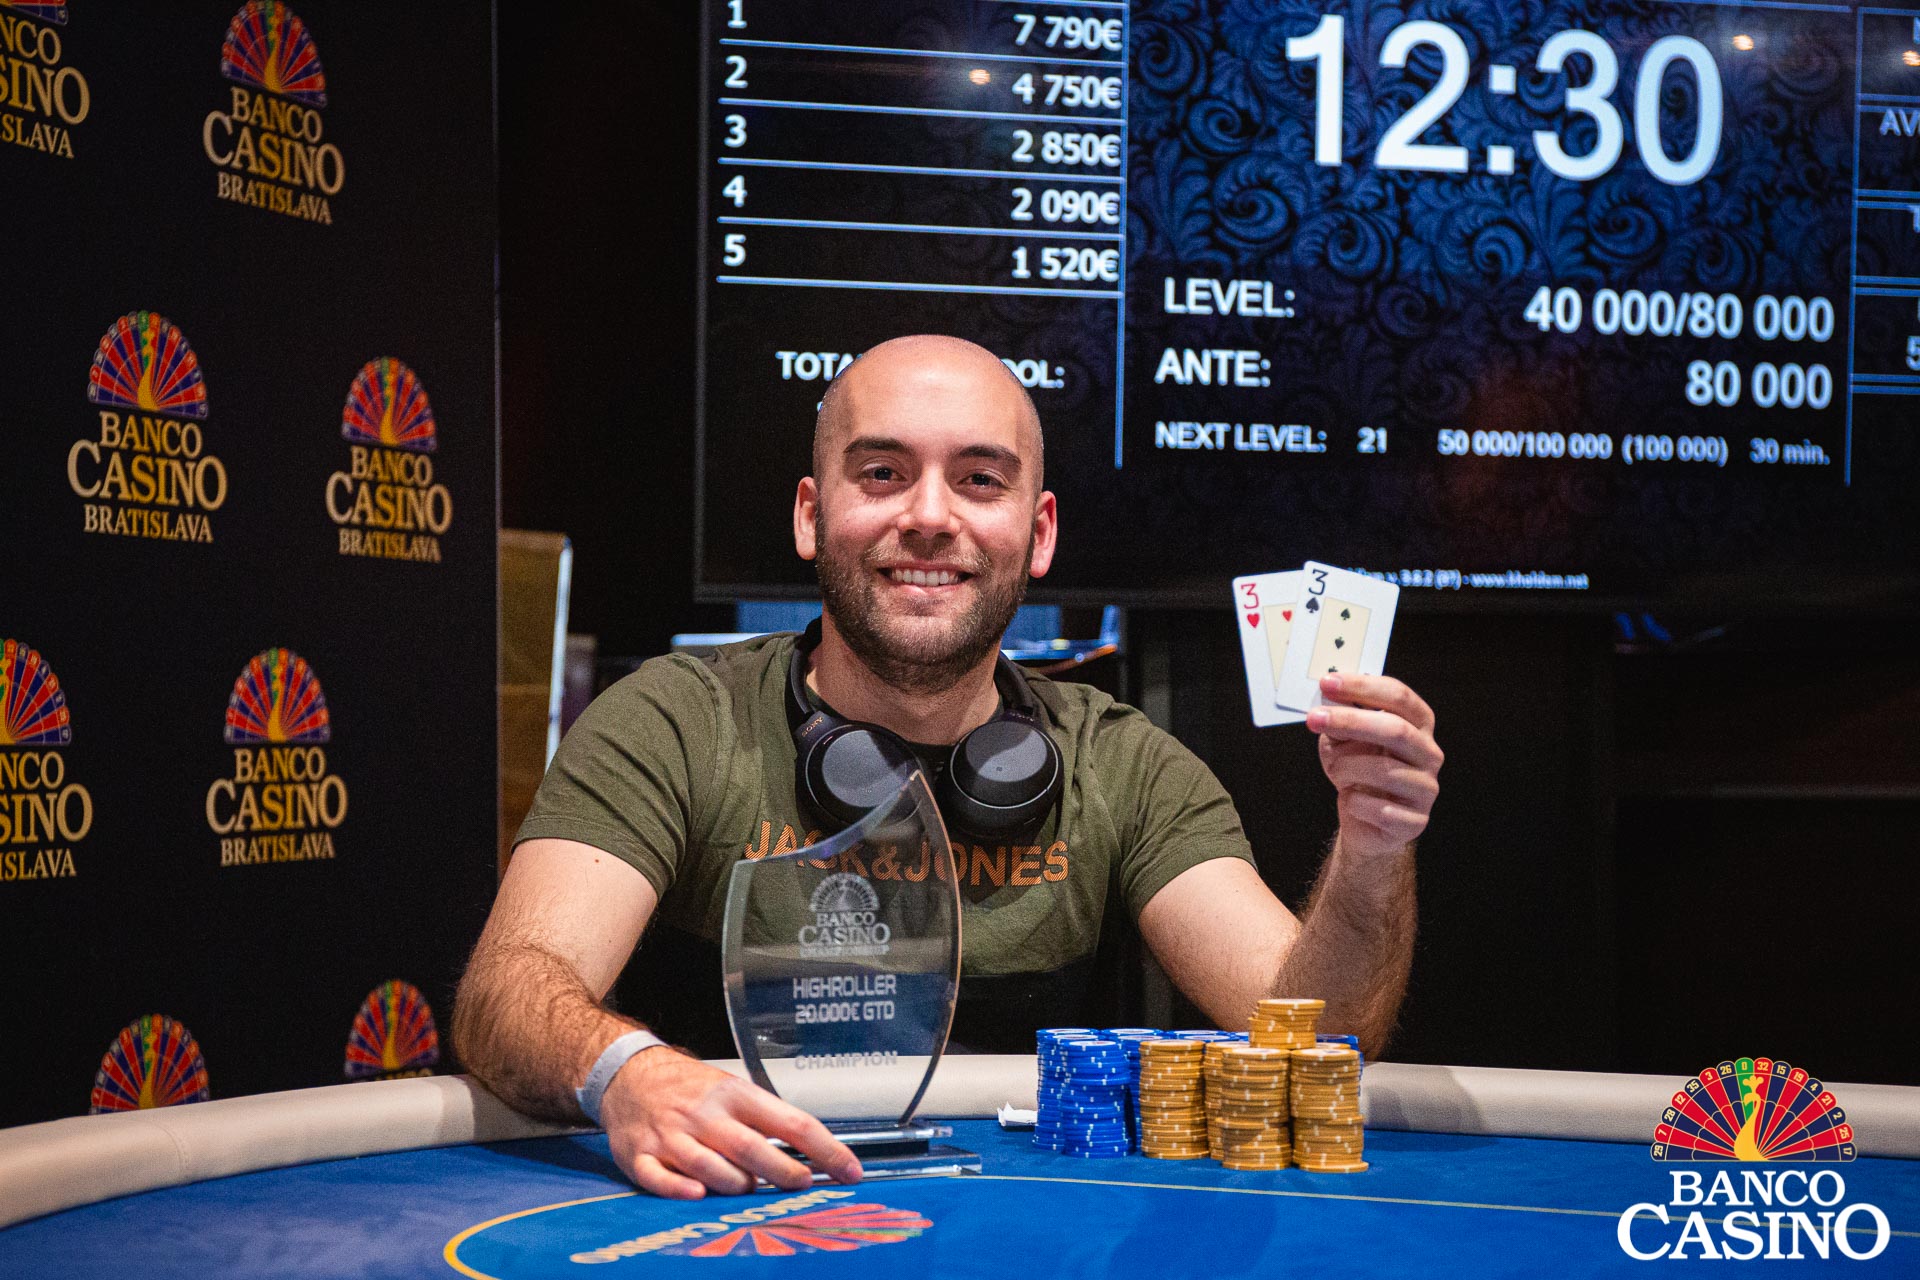 Banco Casino Championship 150,000€ GTD – Bokowski, champion of Highroller and Main Event, moved other players to the finals!